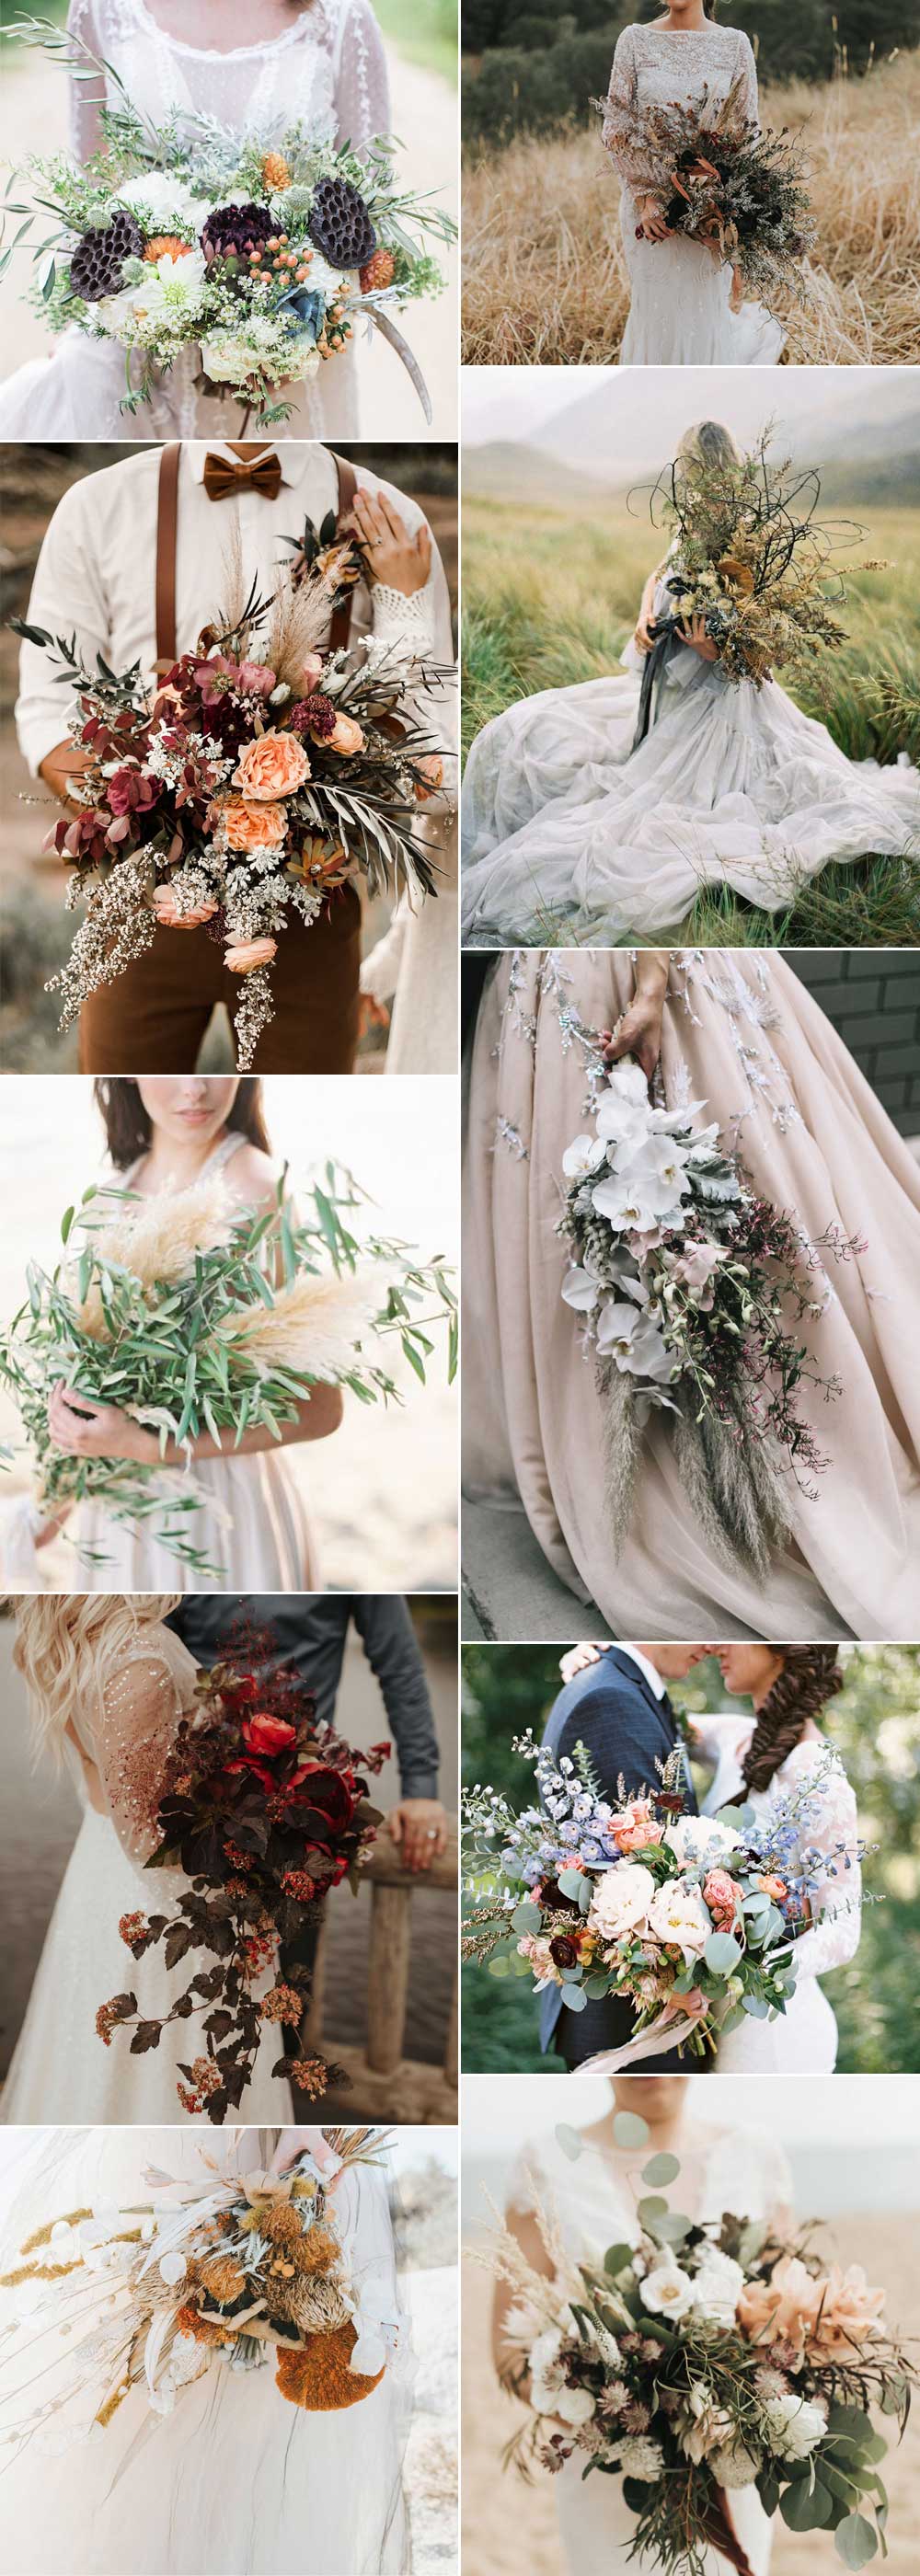 Unusual Bridal Bouquets for your Wedding Day